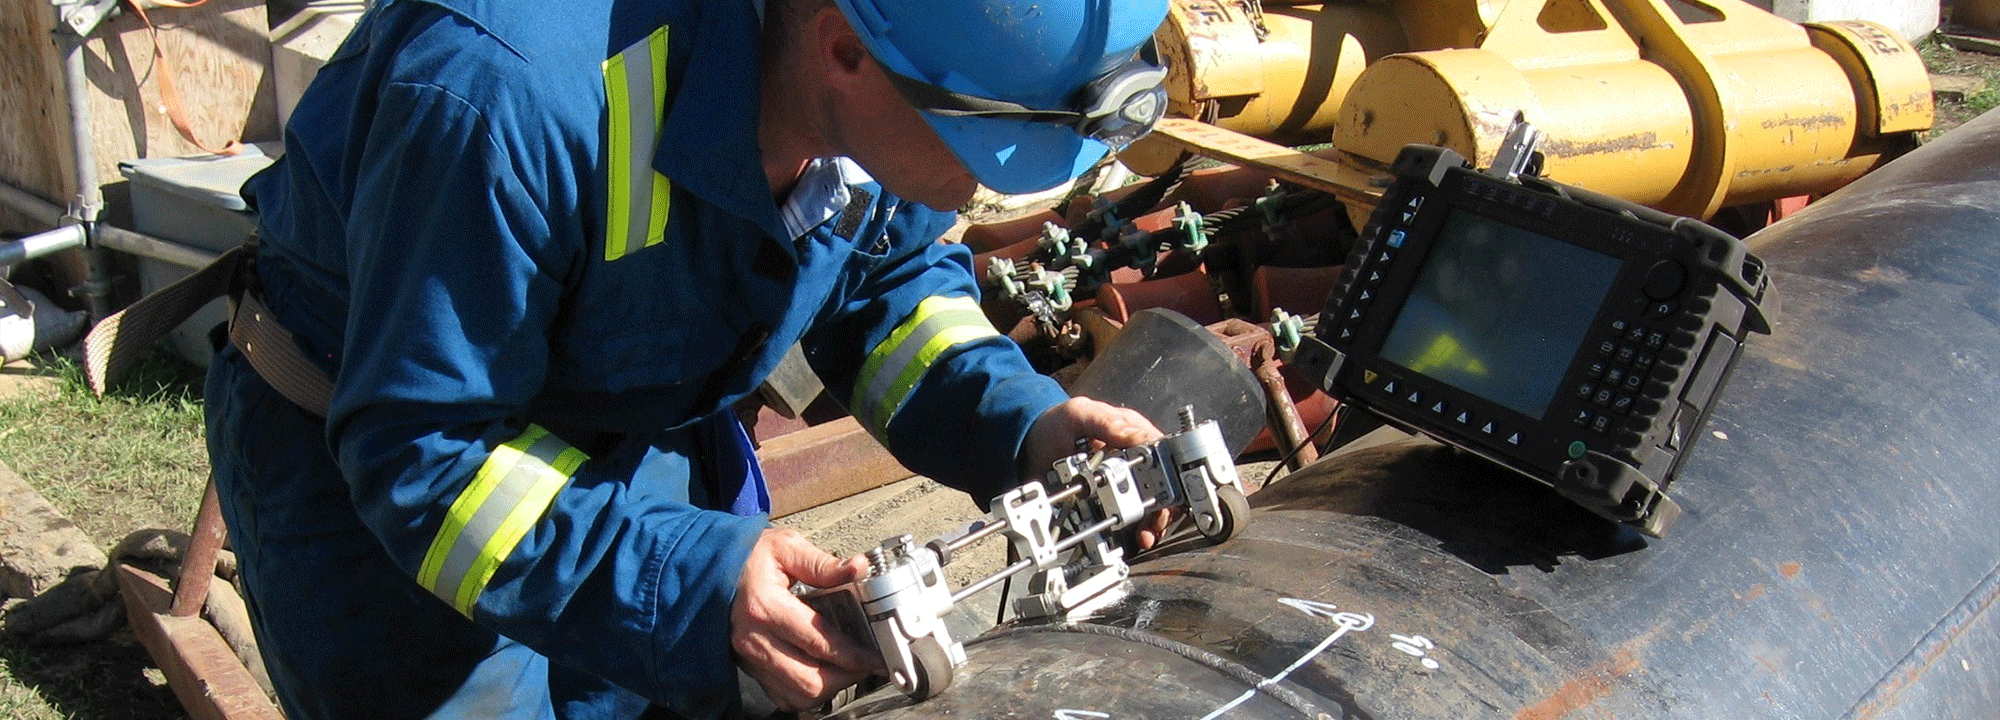 NDT equipment in use